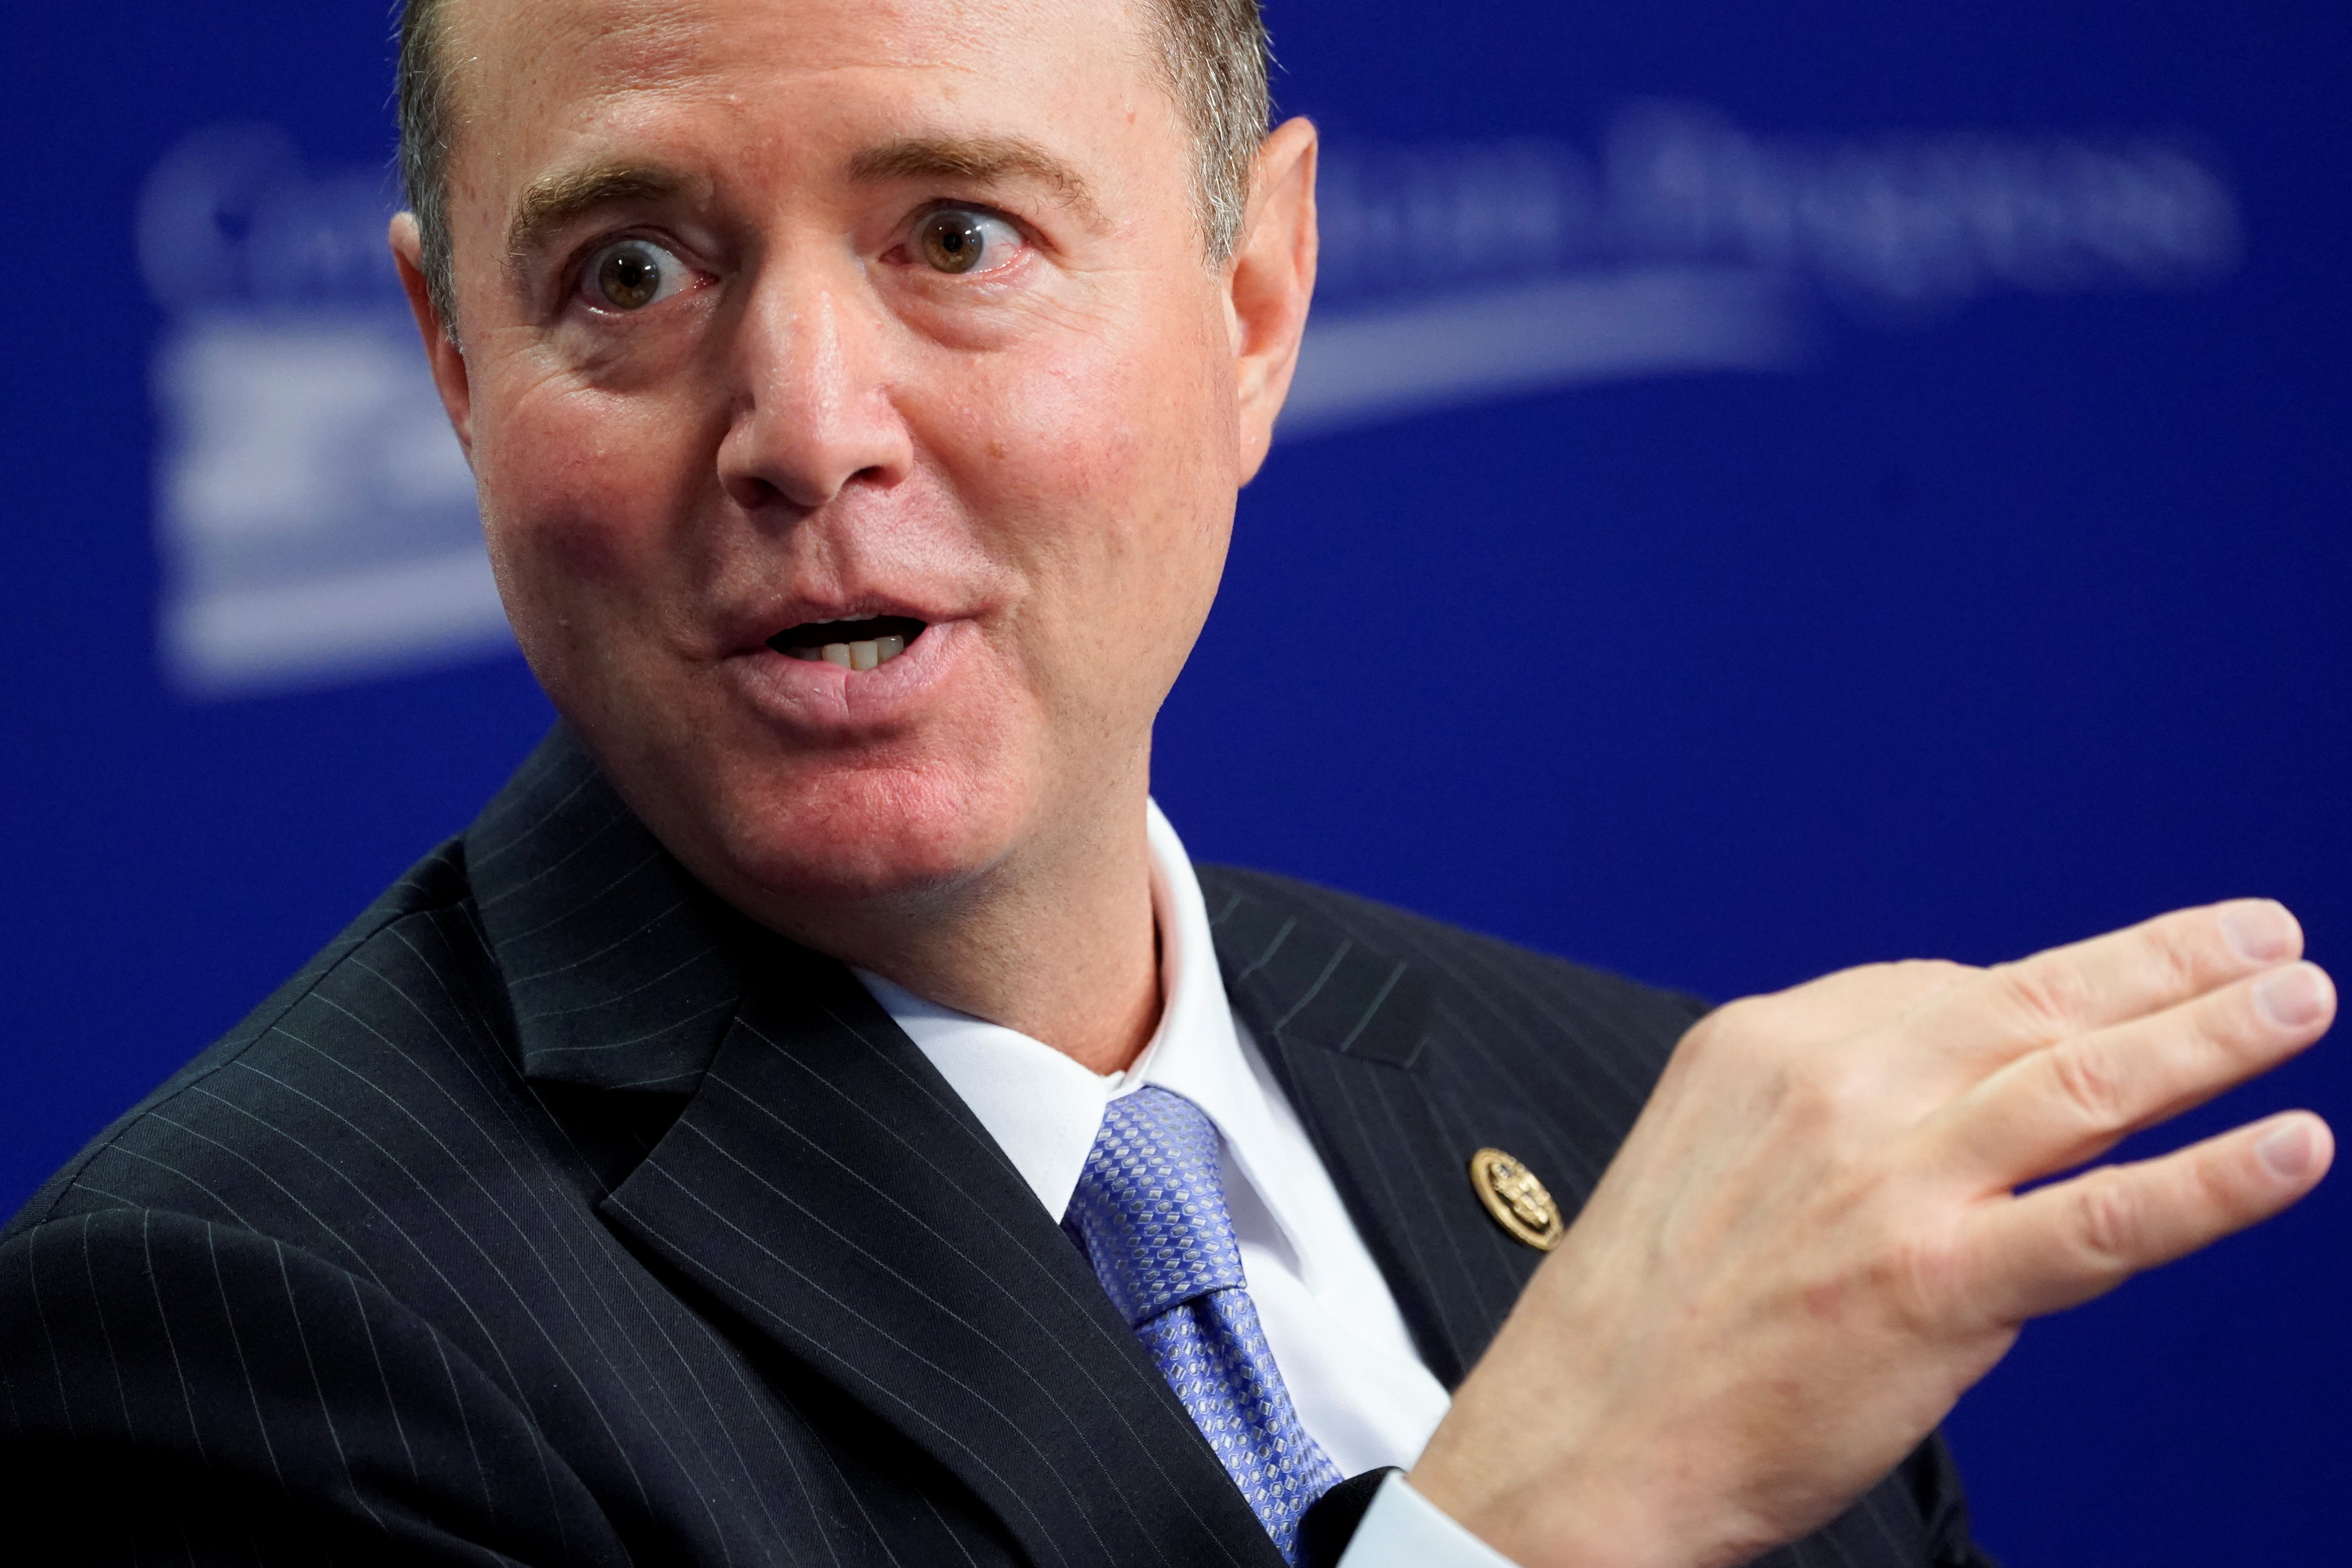 Schiff gestures with one hand as he speaks onstage